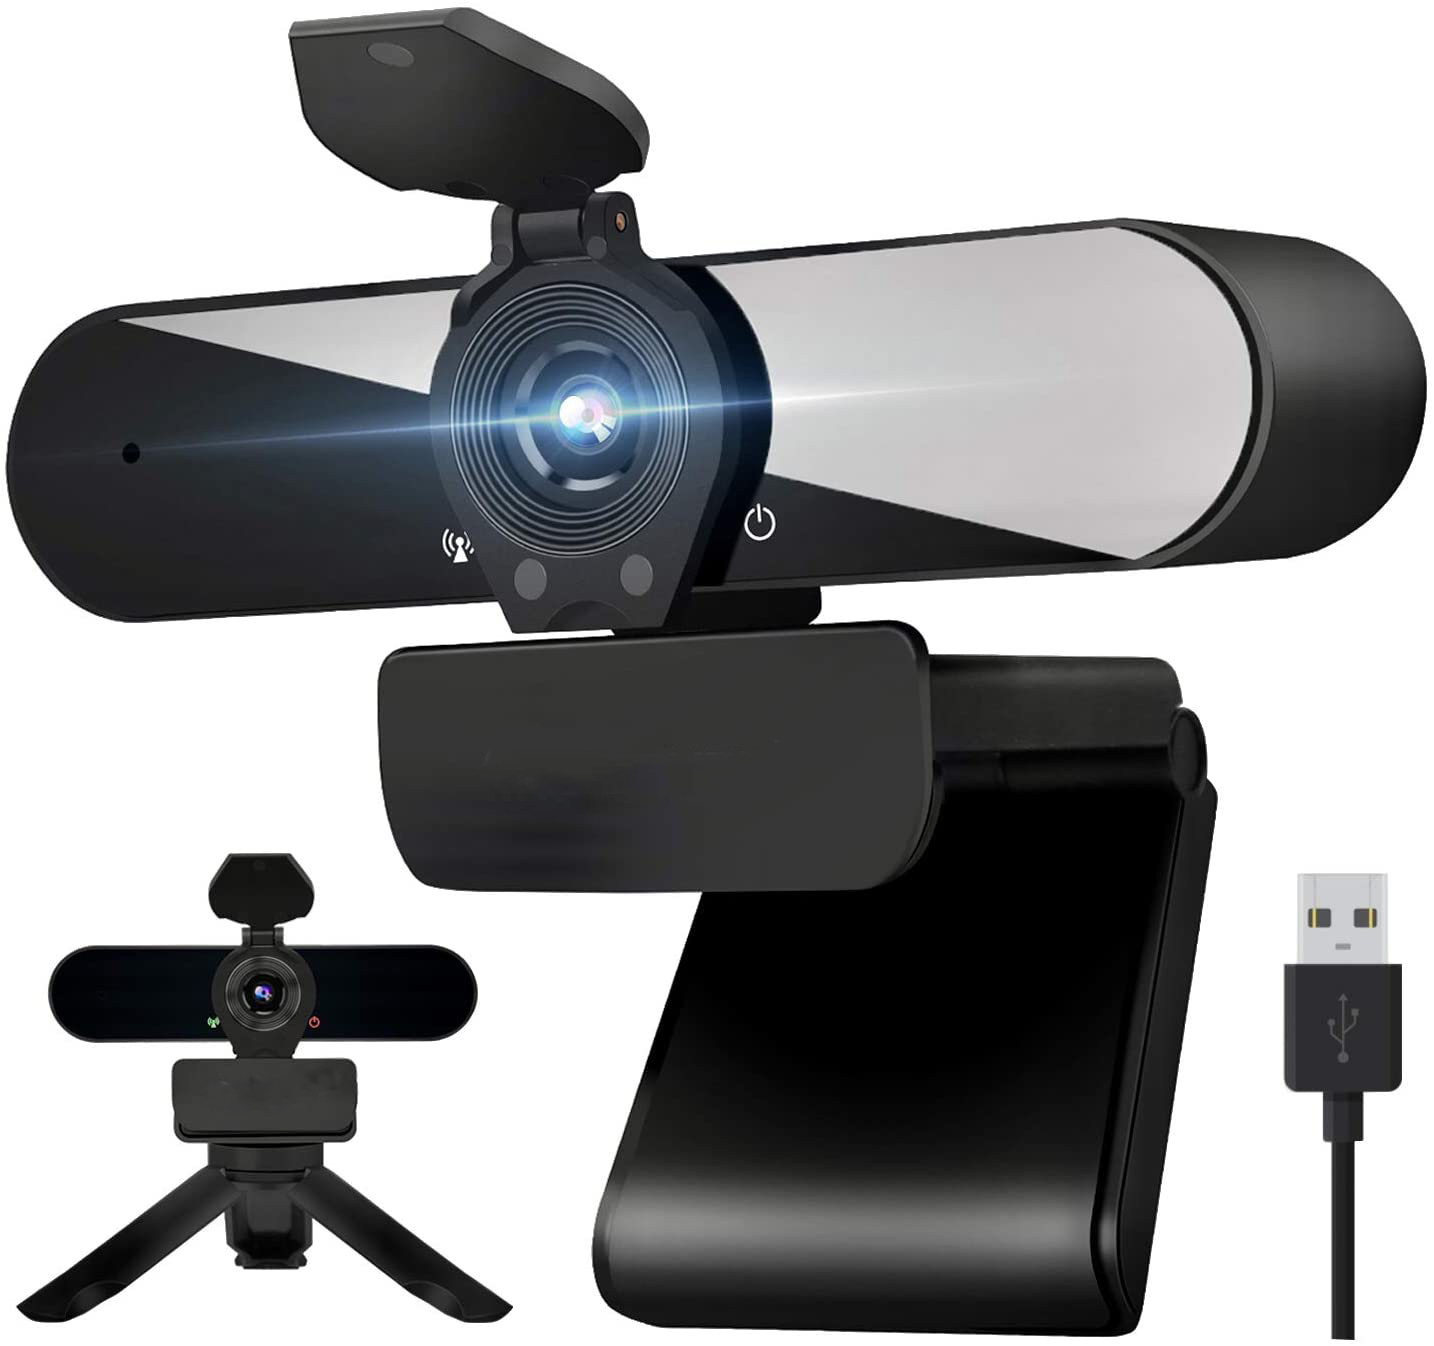 1440P HD Webcam with Microphone, Streaming Computer Web Camera USB PC Desktop Laptop Webcam with Stand/Privacy Cover/Tripod Stand, Autofocus, Noise Reduction for Video Calling/Zoom/Meeting - image 1 of 9